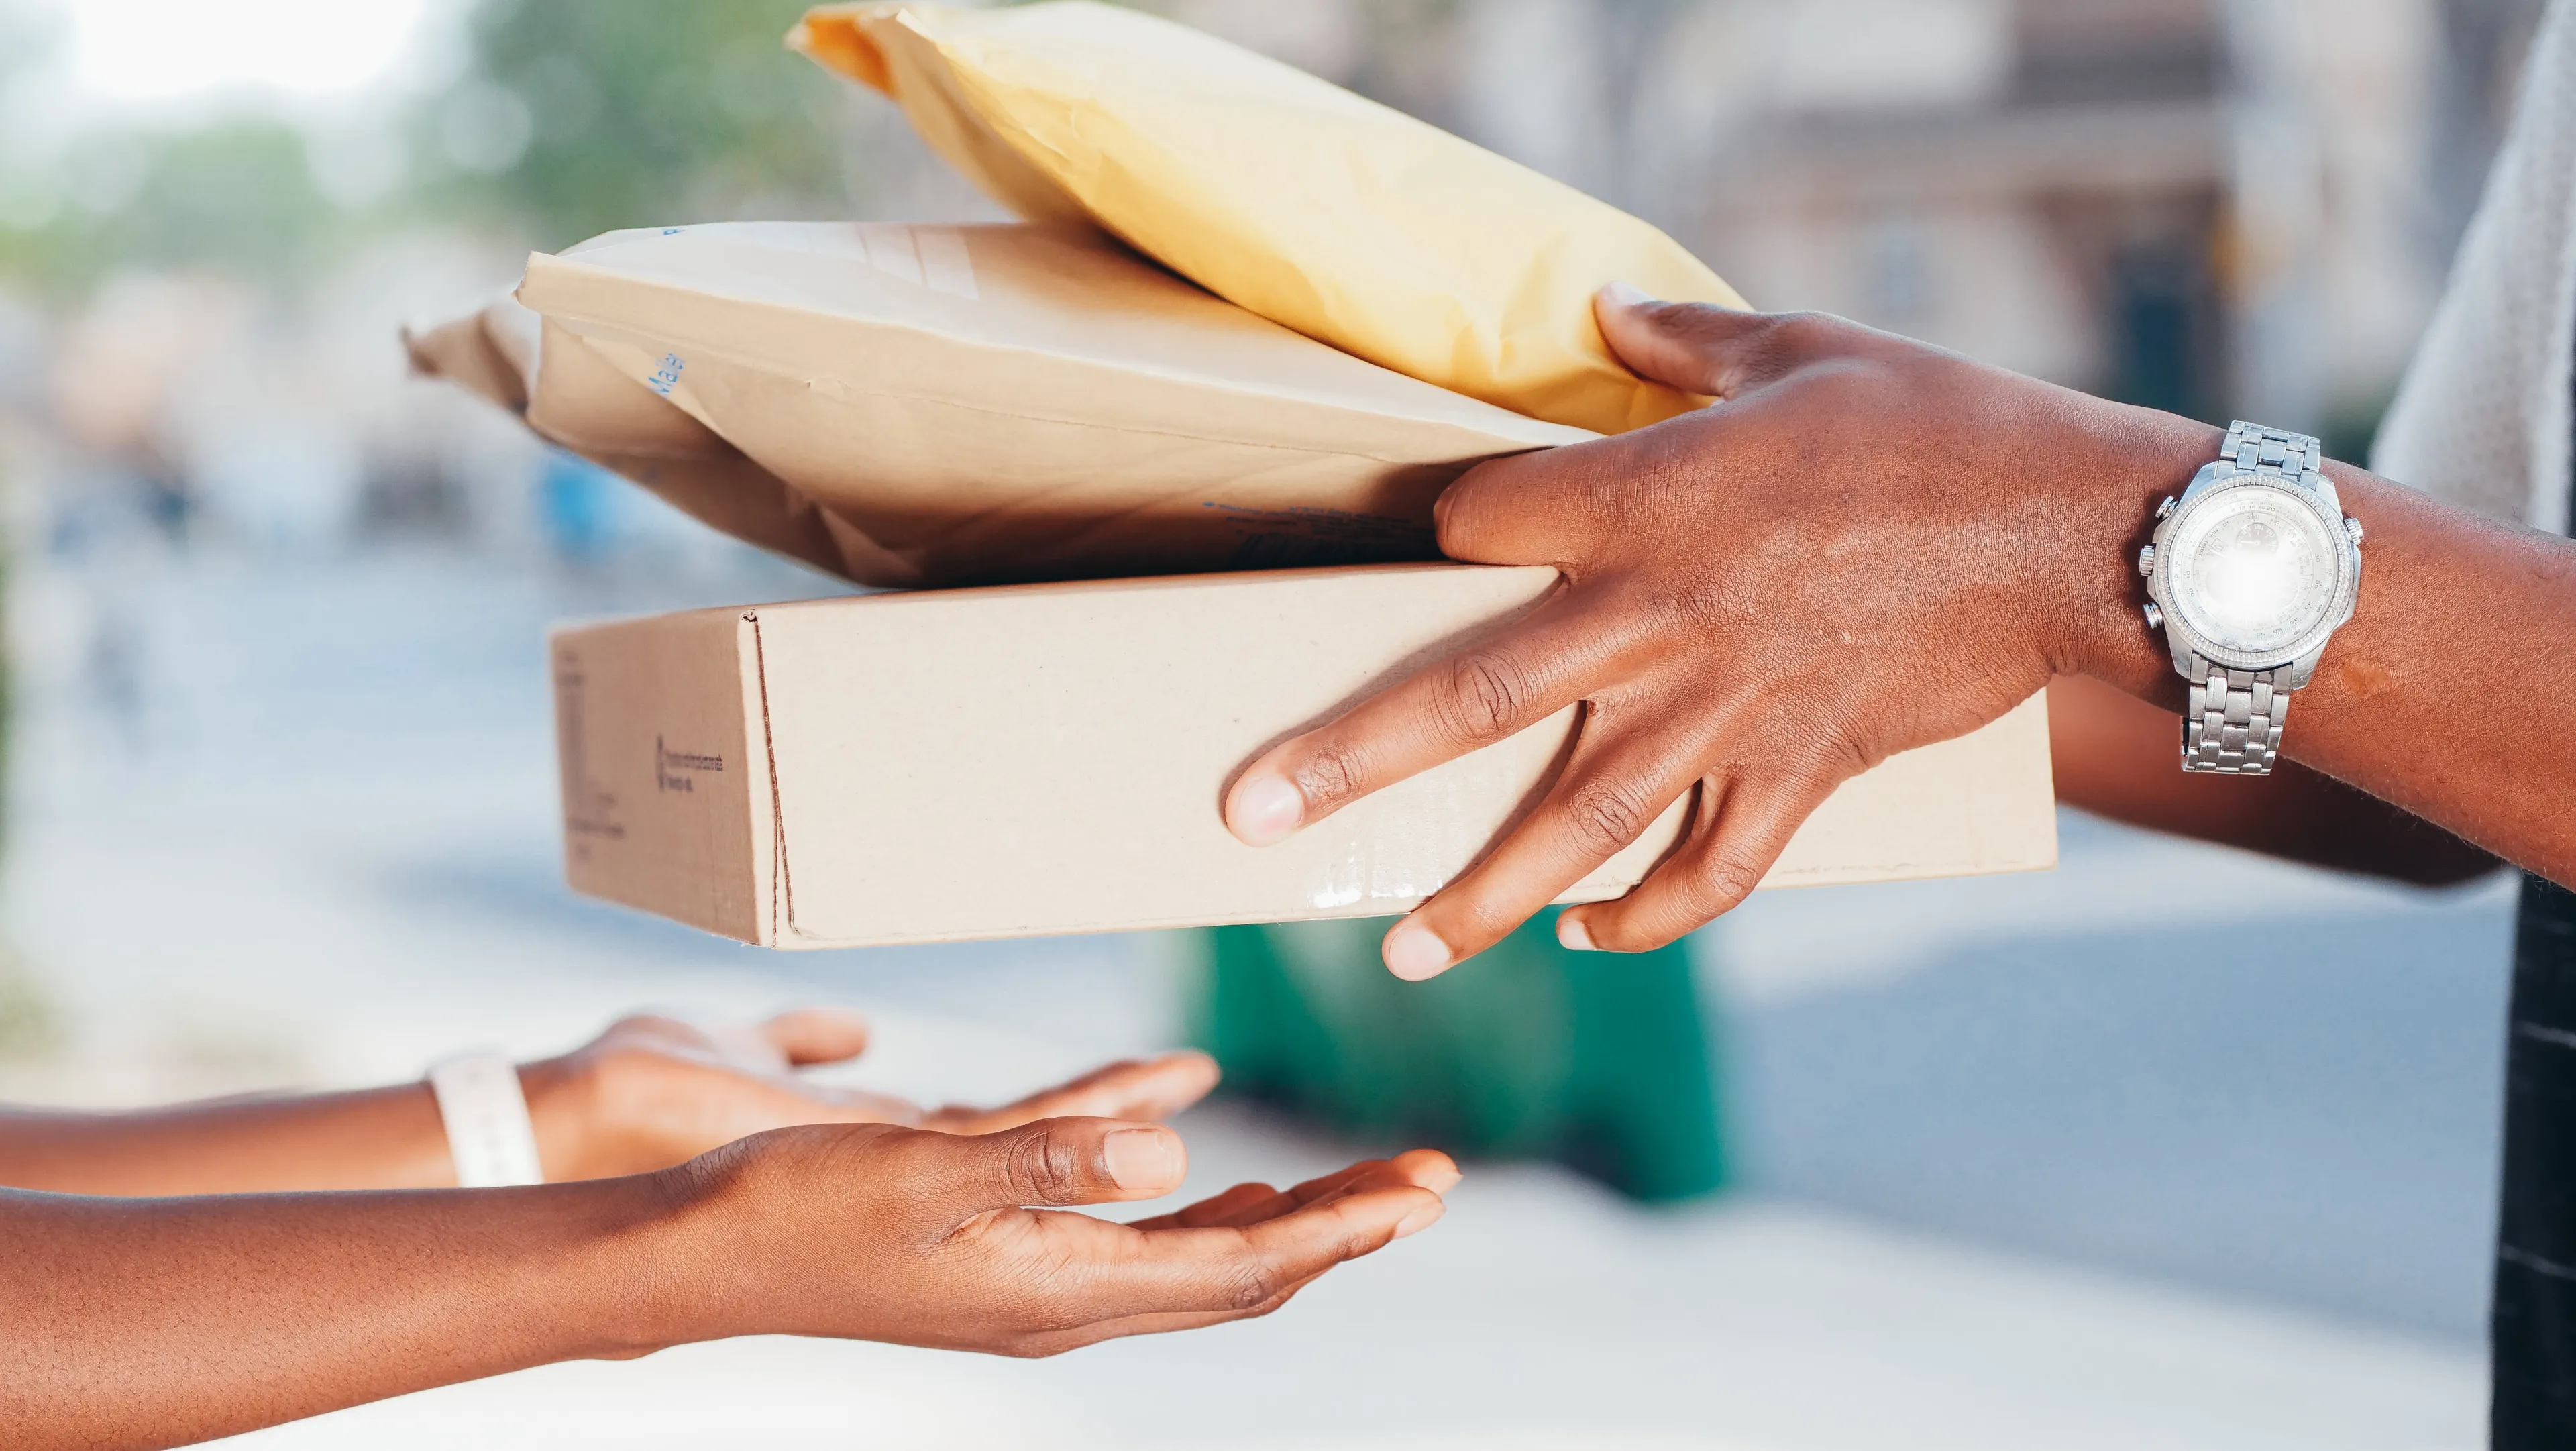 hands handing over 3 packages to another person